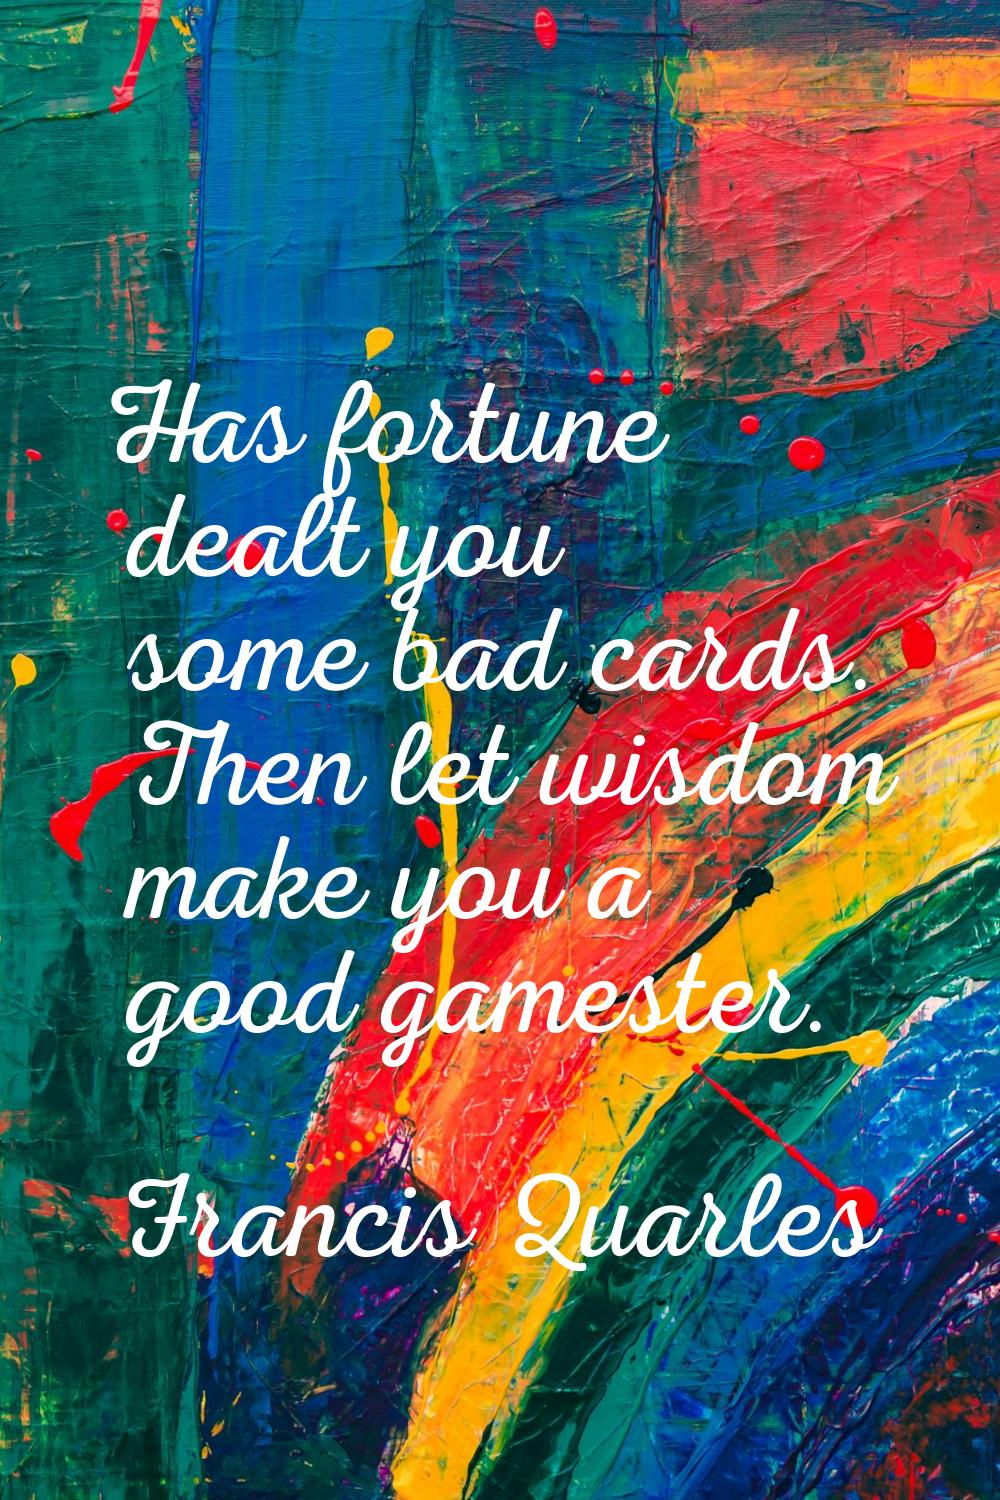 Has fortune dealt you some bad cards. Then let wisdom make you a good gamester.